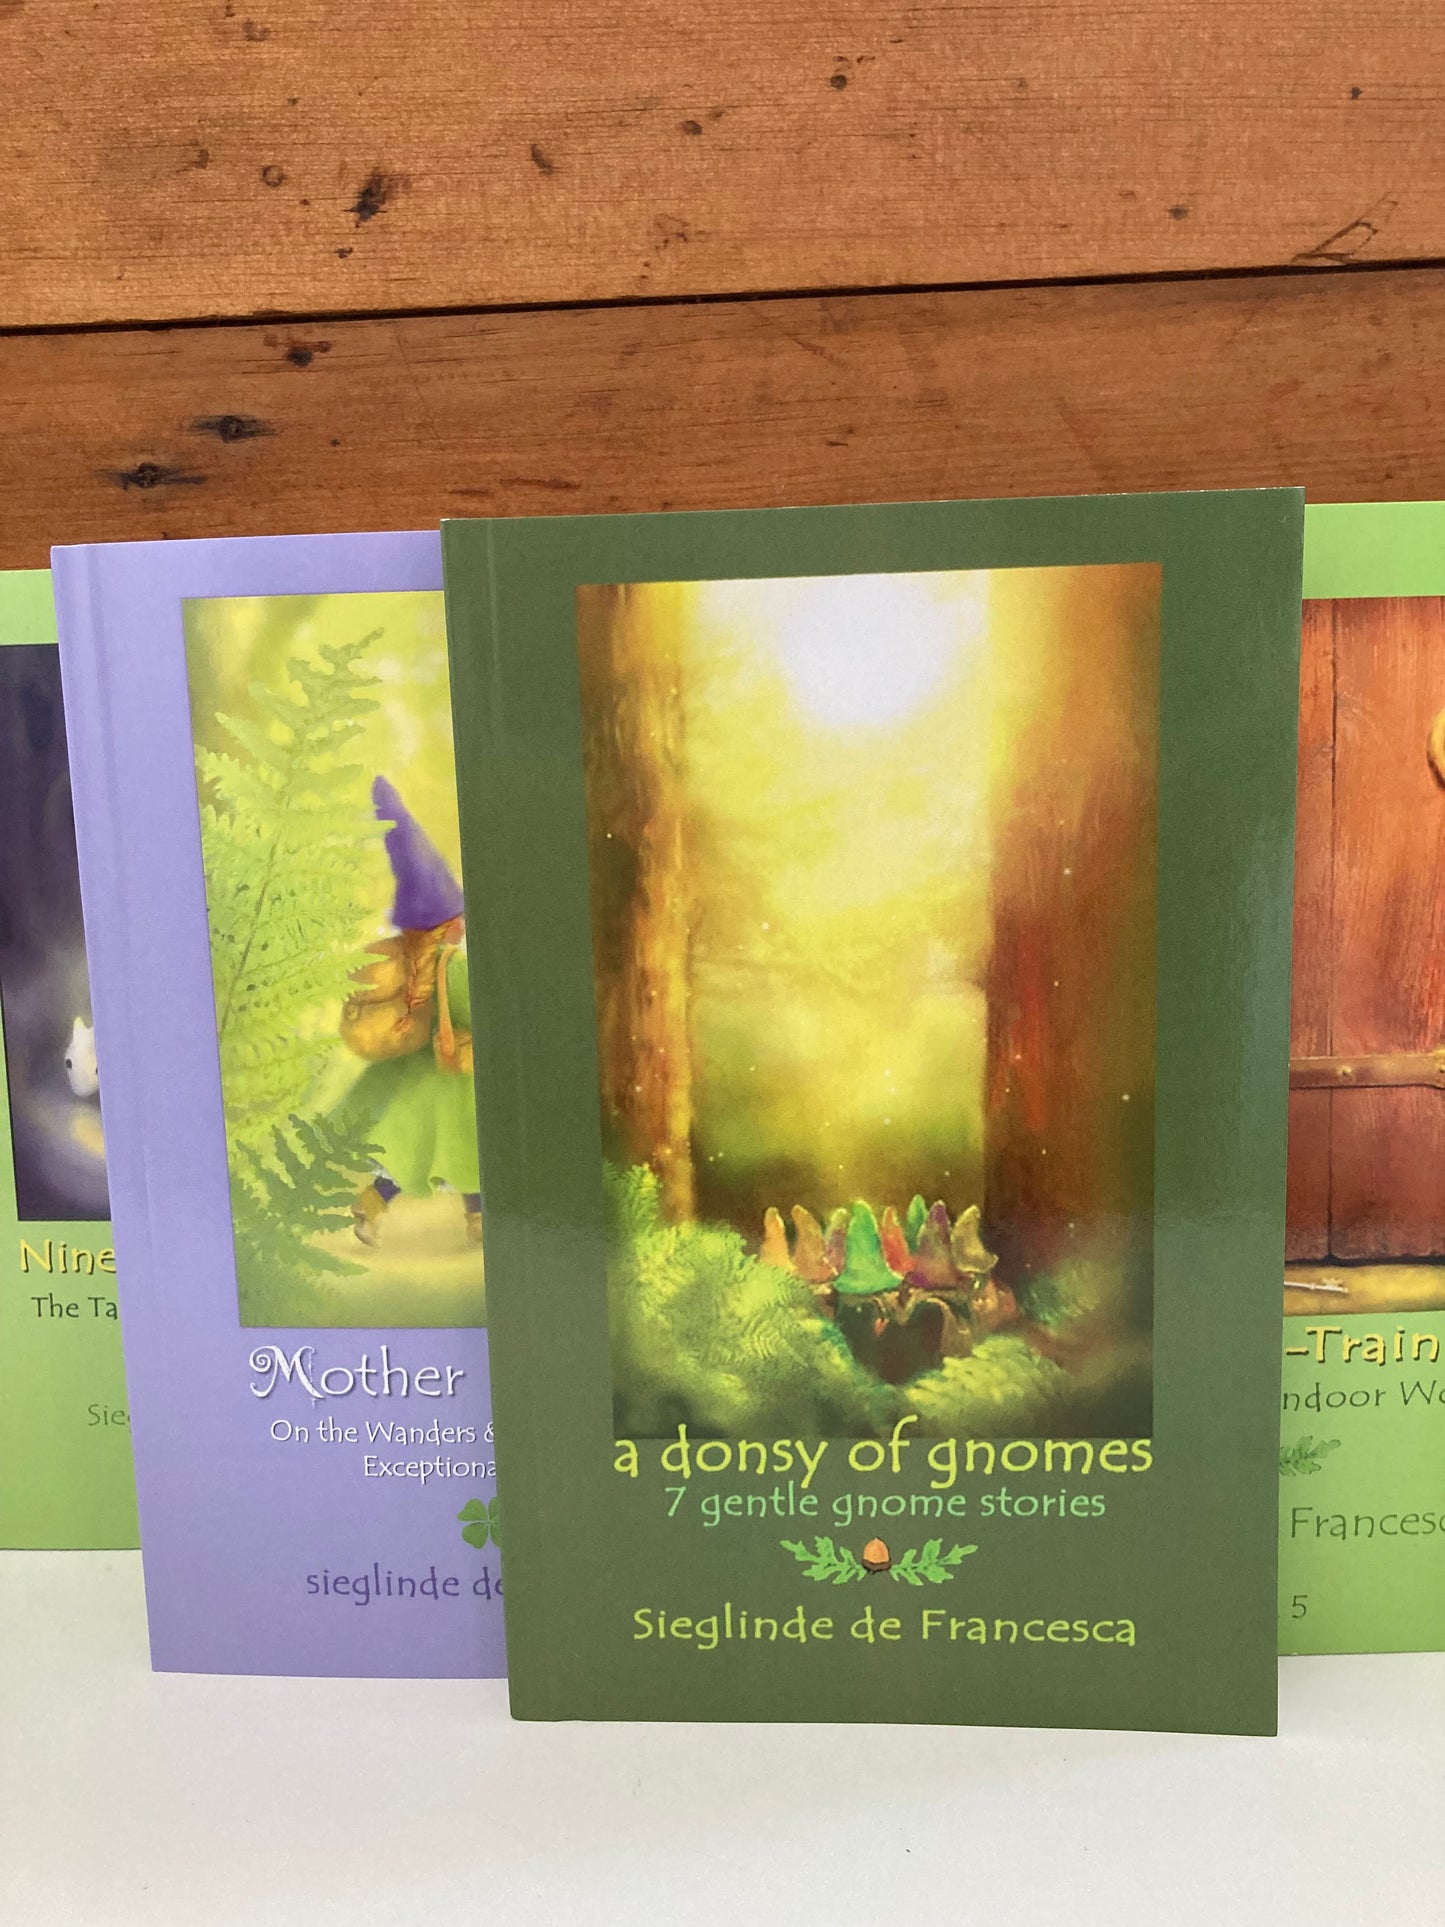 Chapter Book for Young Readers - MOTHER COMFREY